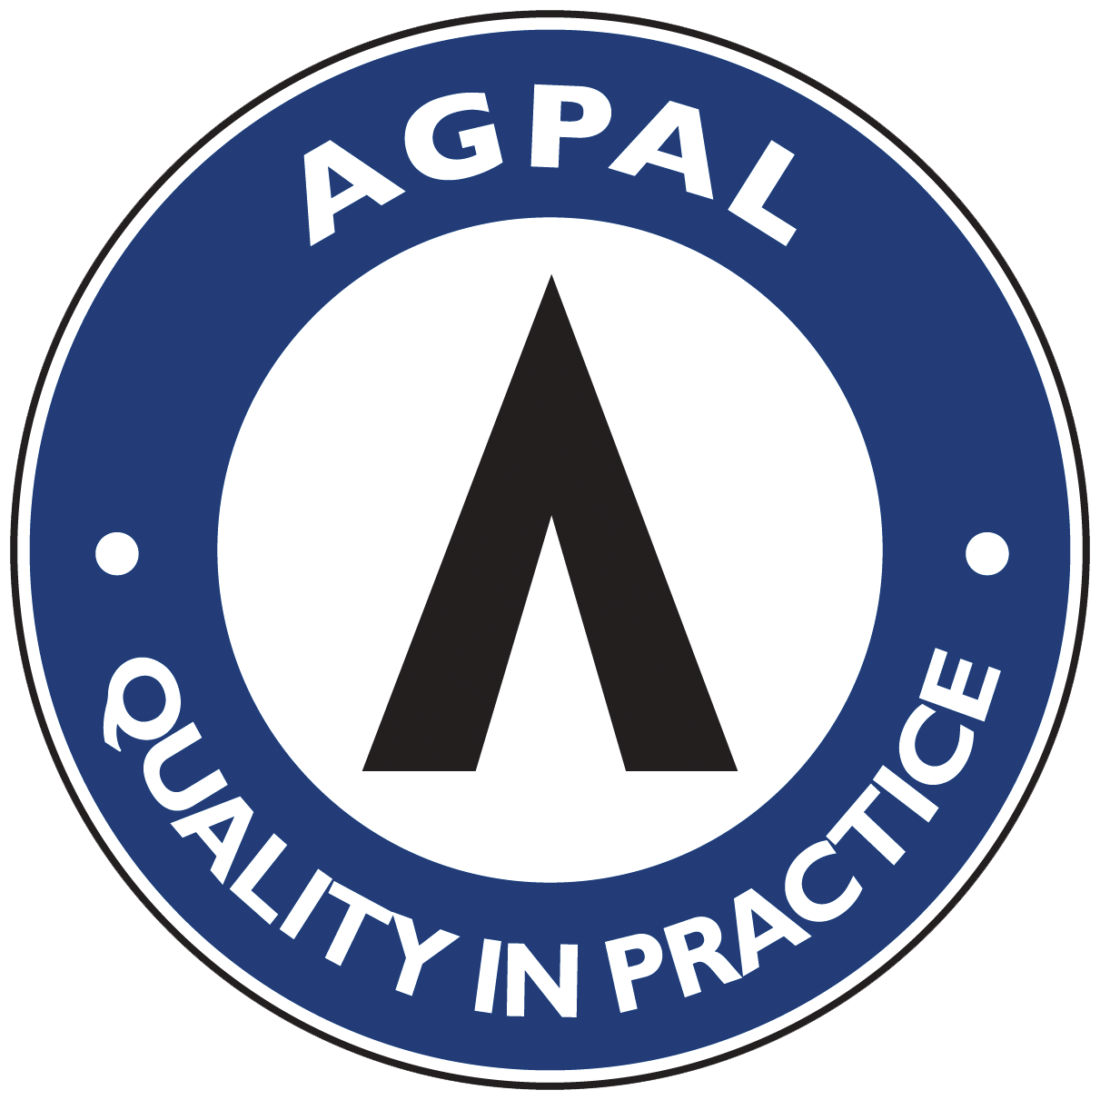 Agpal Quality in Practice